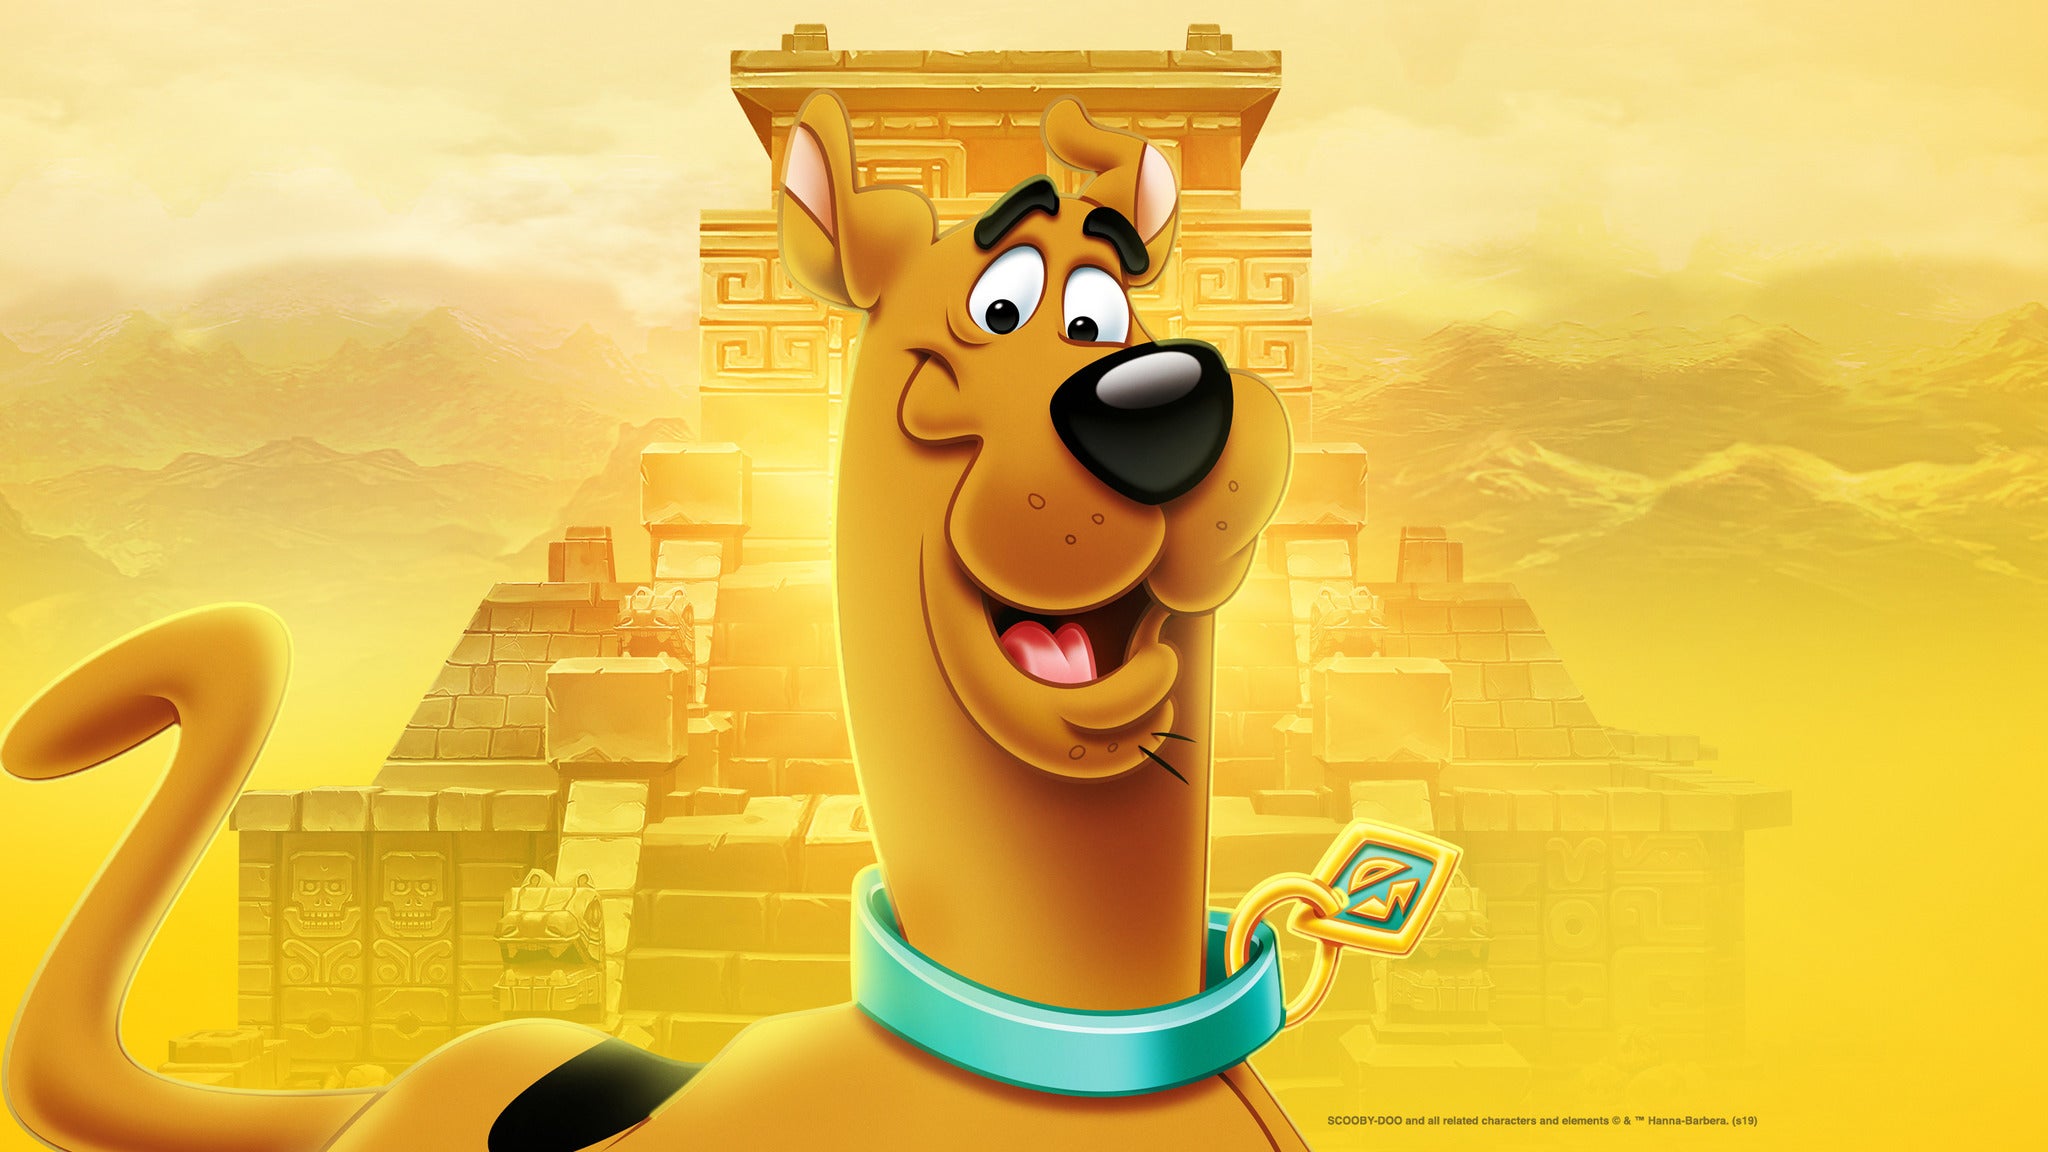 Scooby-Doo! and The Lost City of Gold in Moncton promo photo for Evenko presale offer code